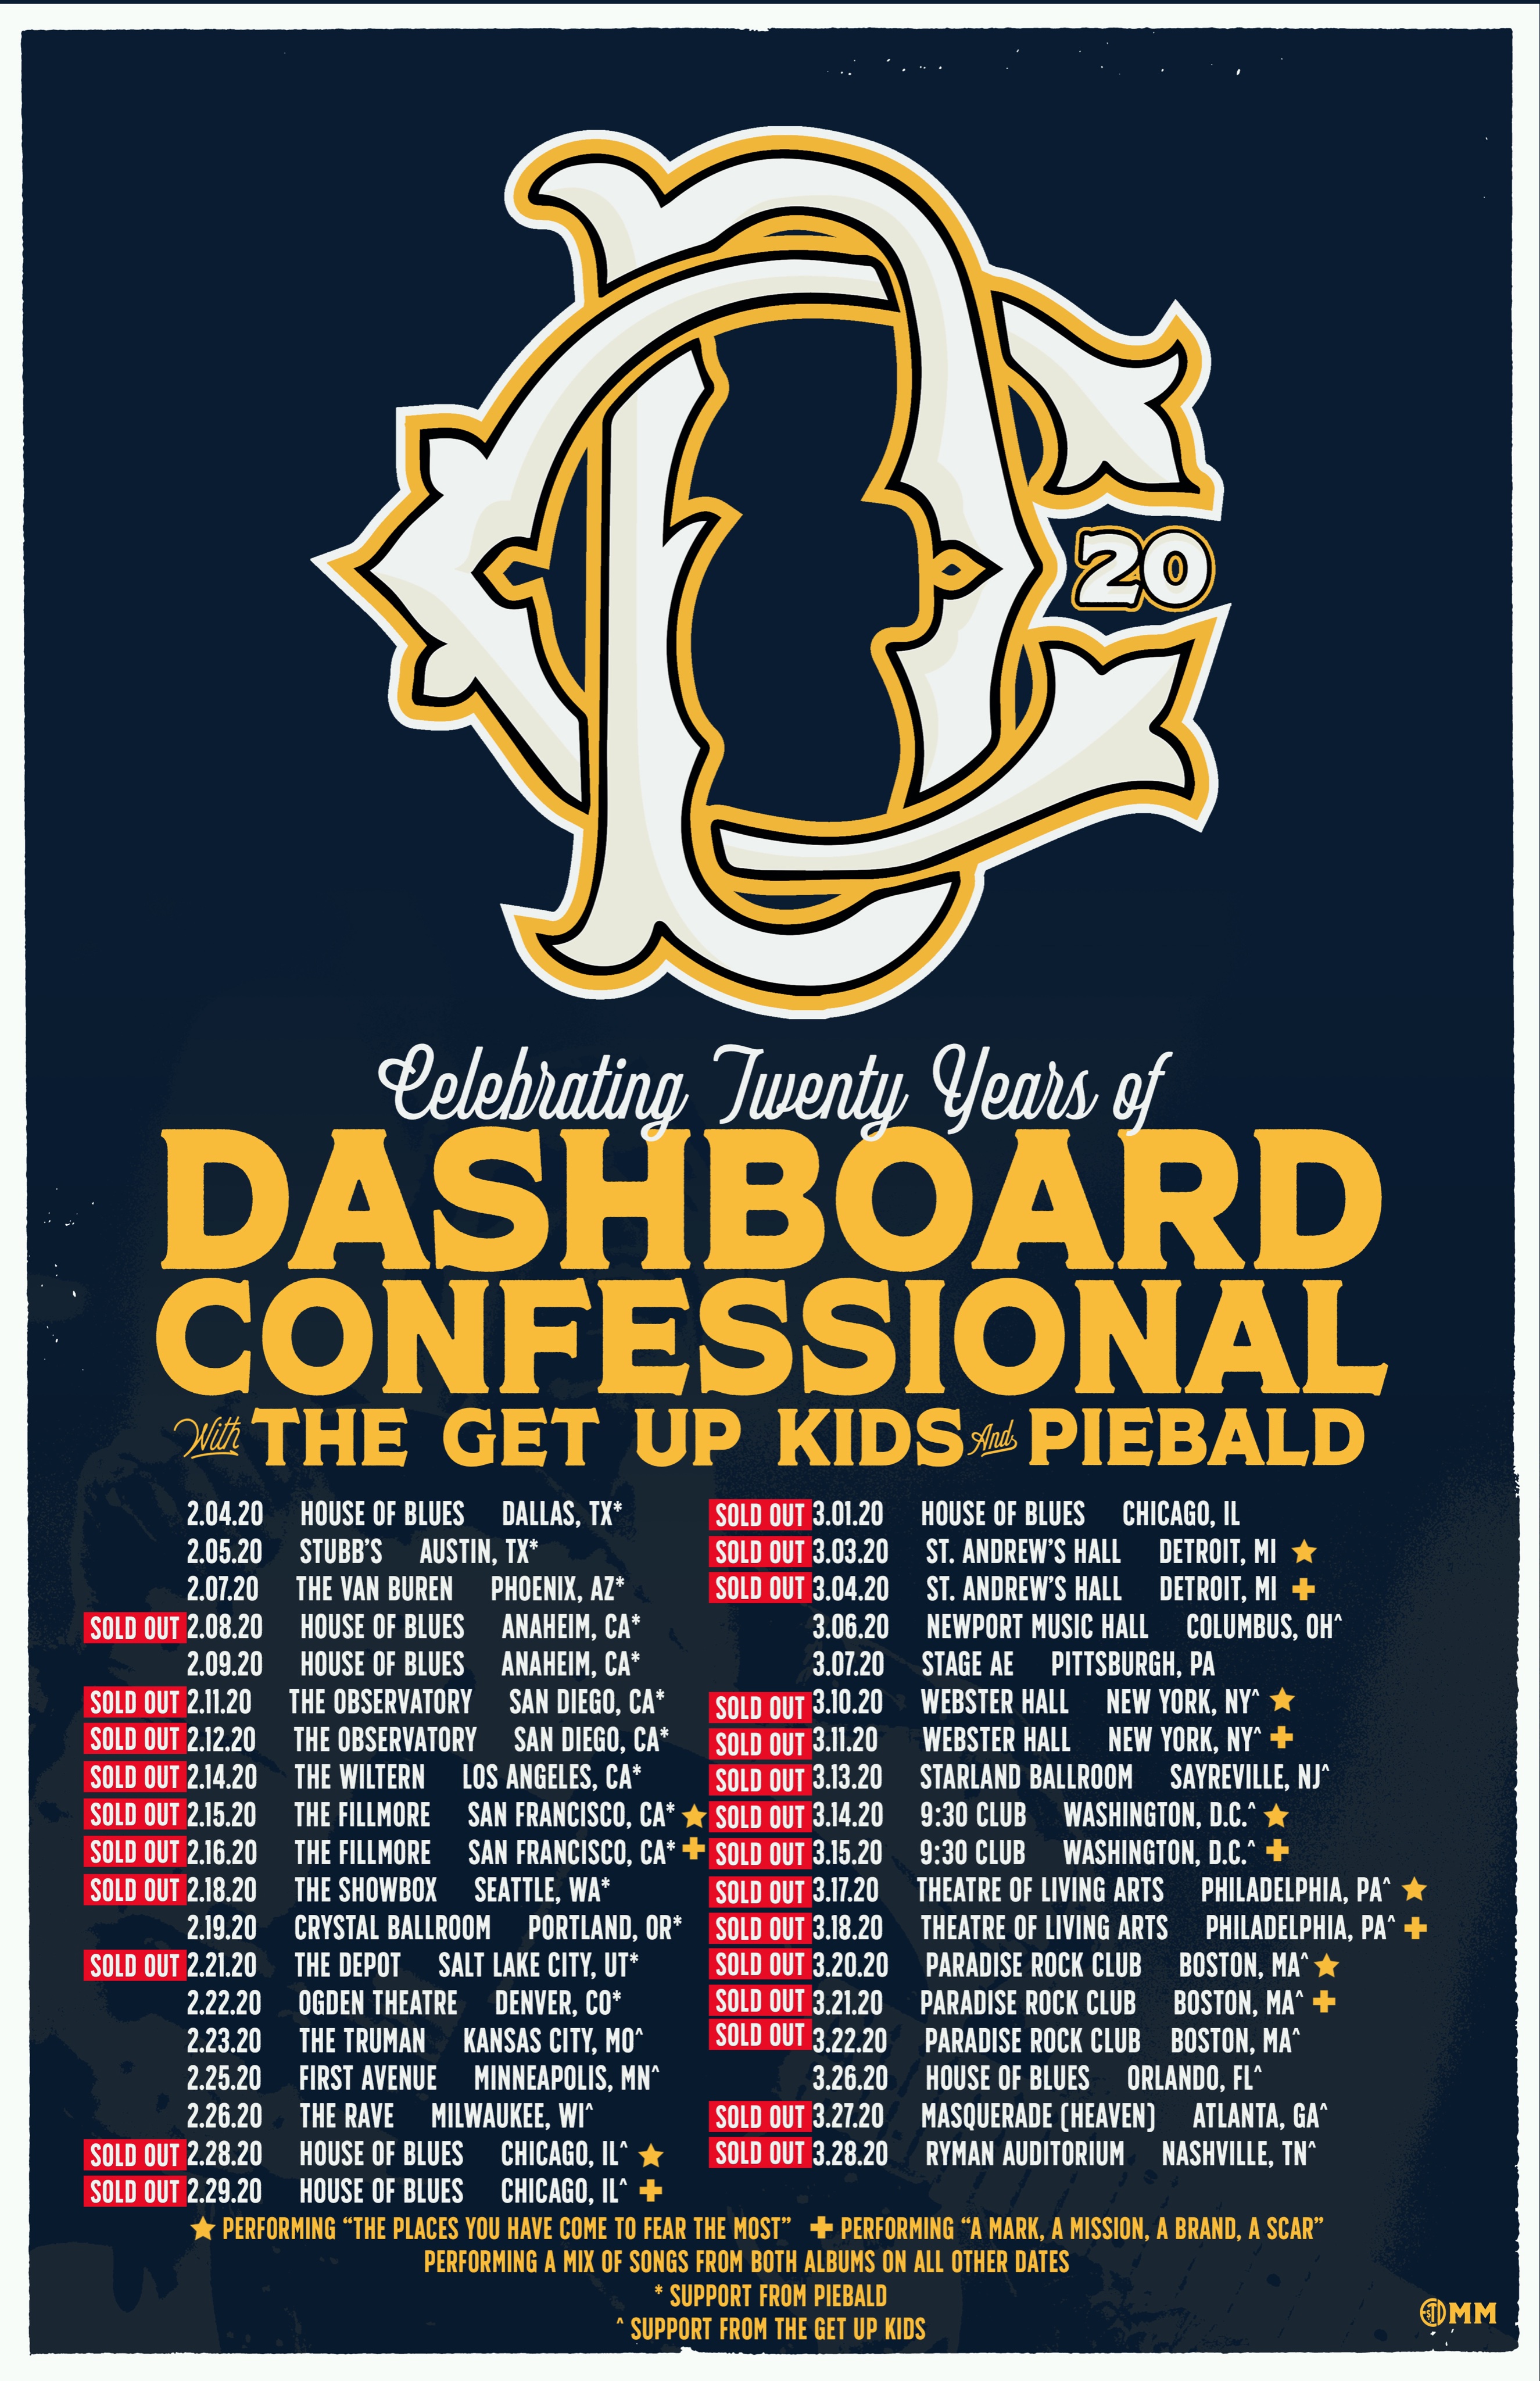 Dashboard Confessional's upcoming tour dates